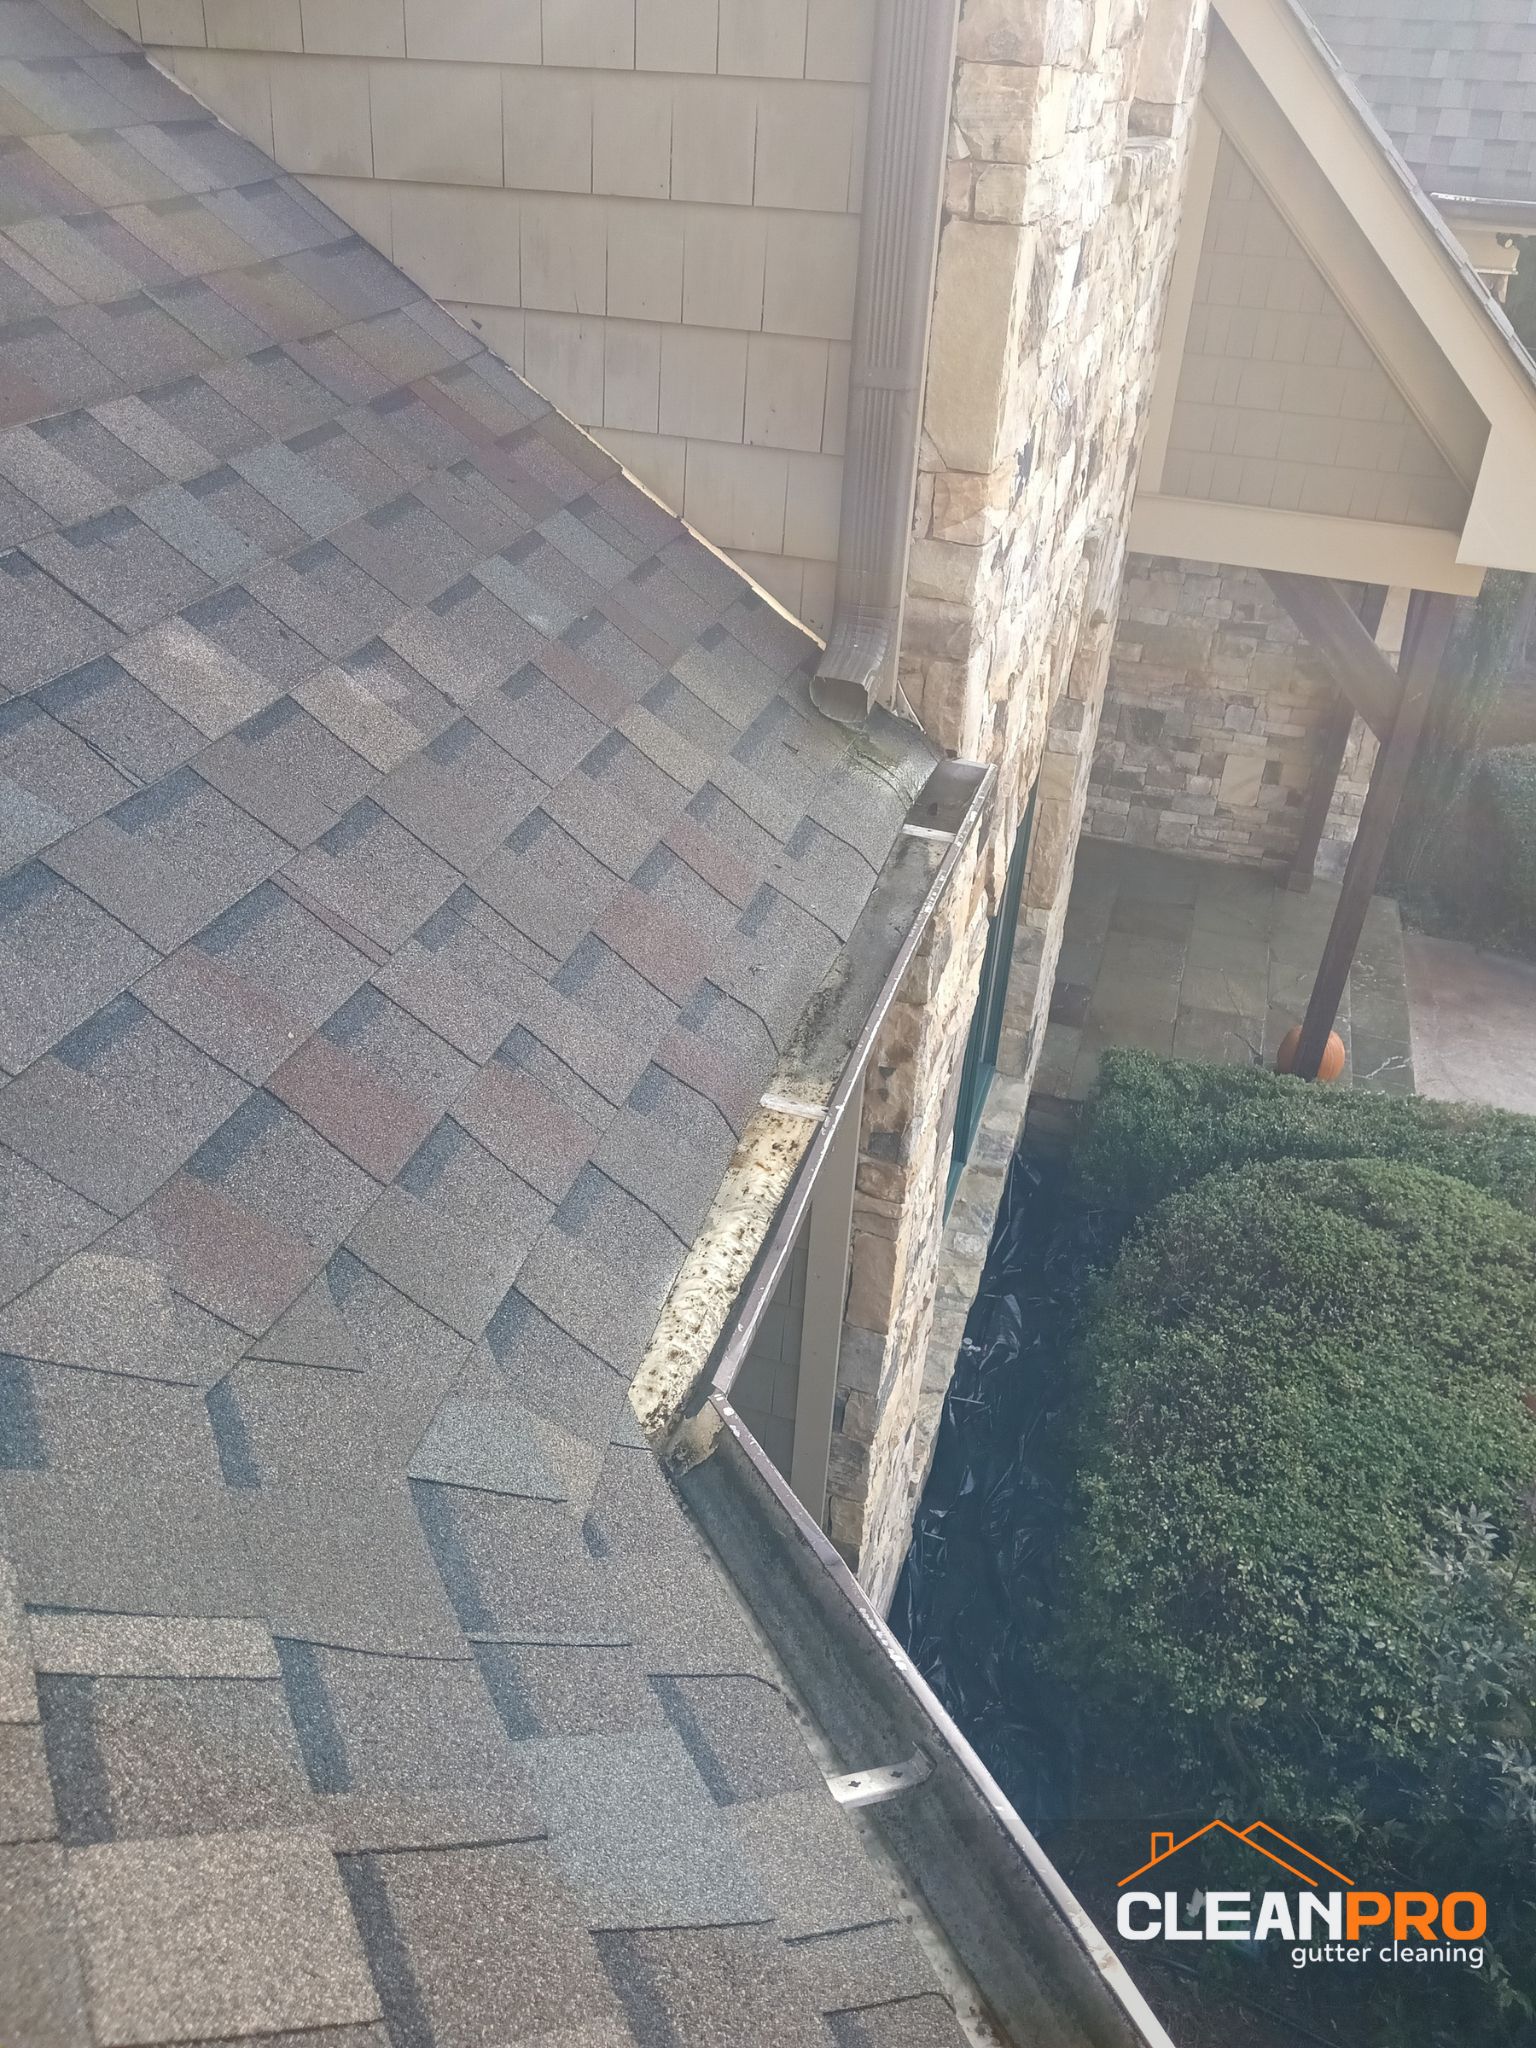 Best Gutter Cleaning Service in Tacoma